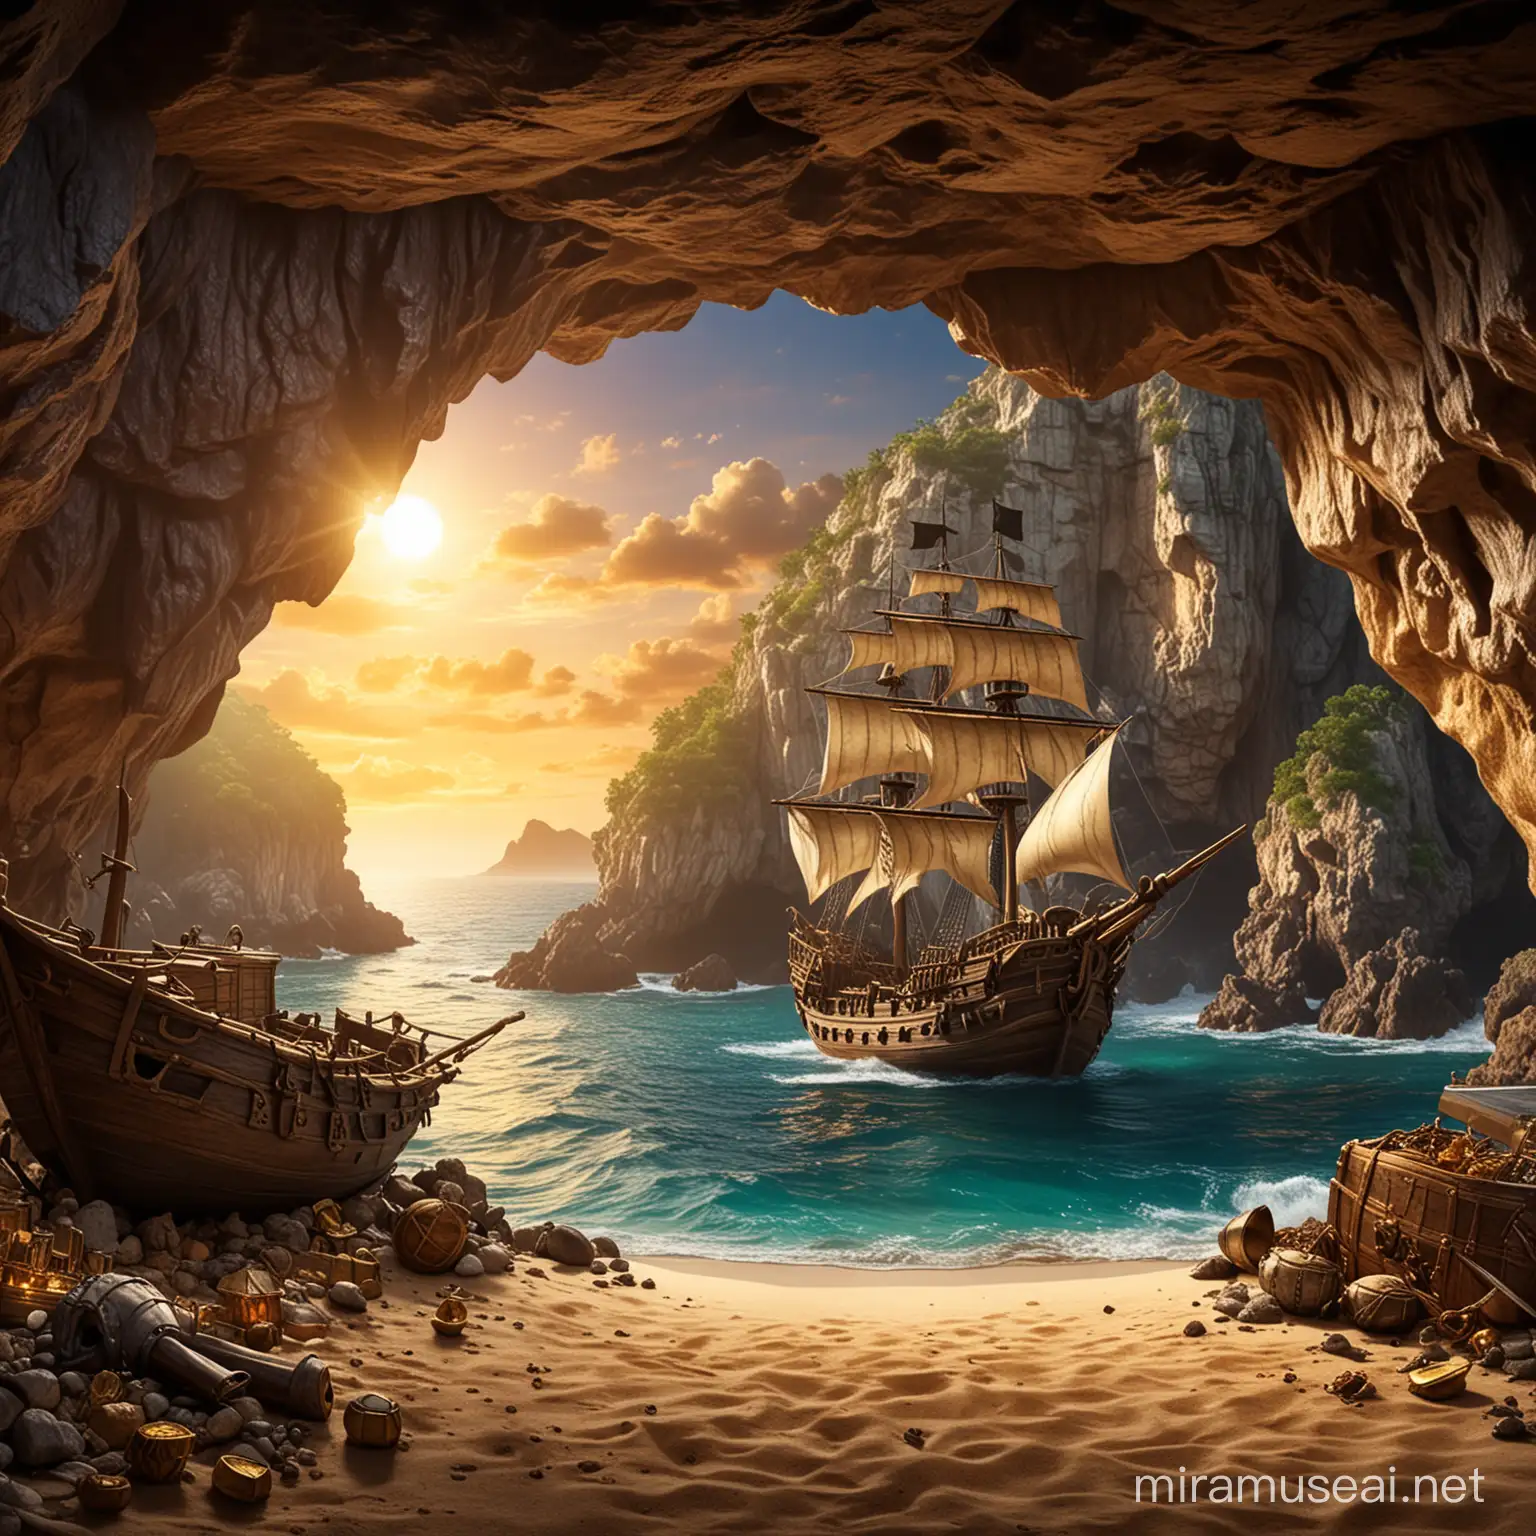 Pirate Treasure Cave with Ship in Background